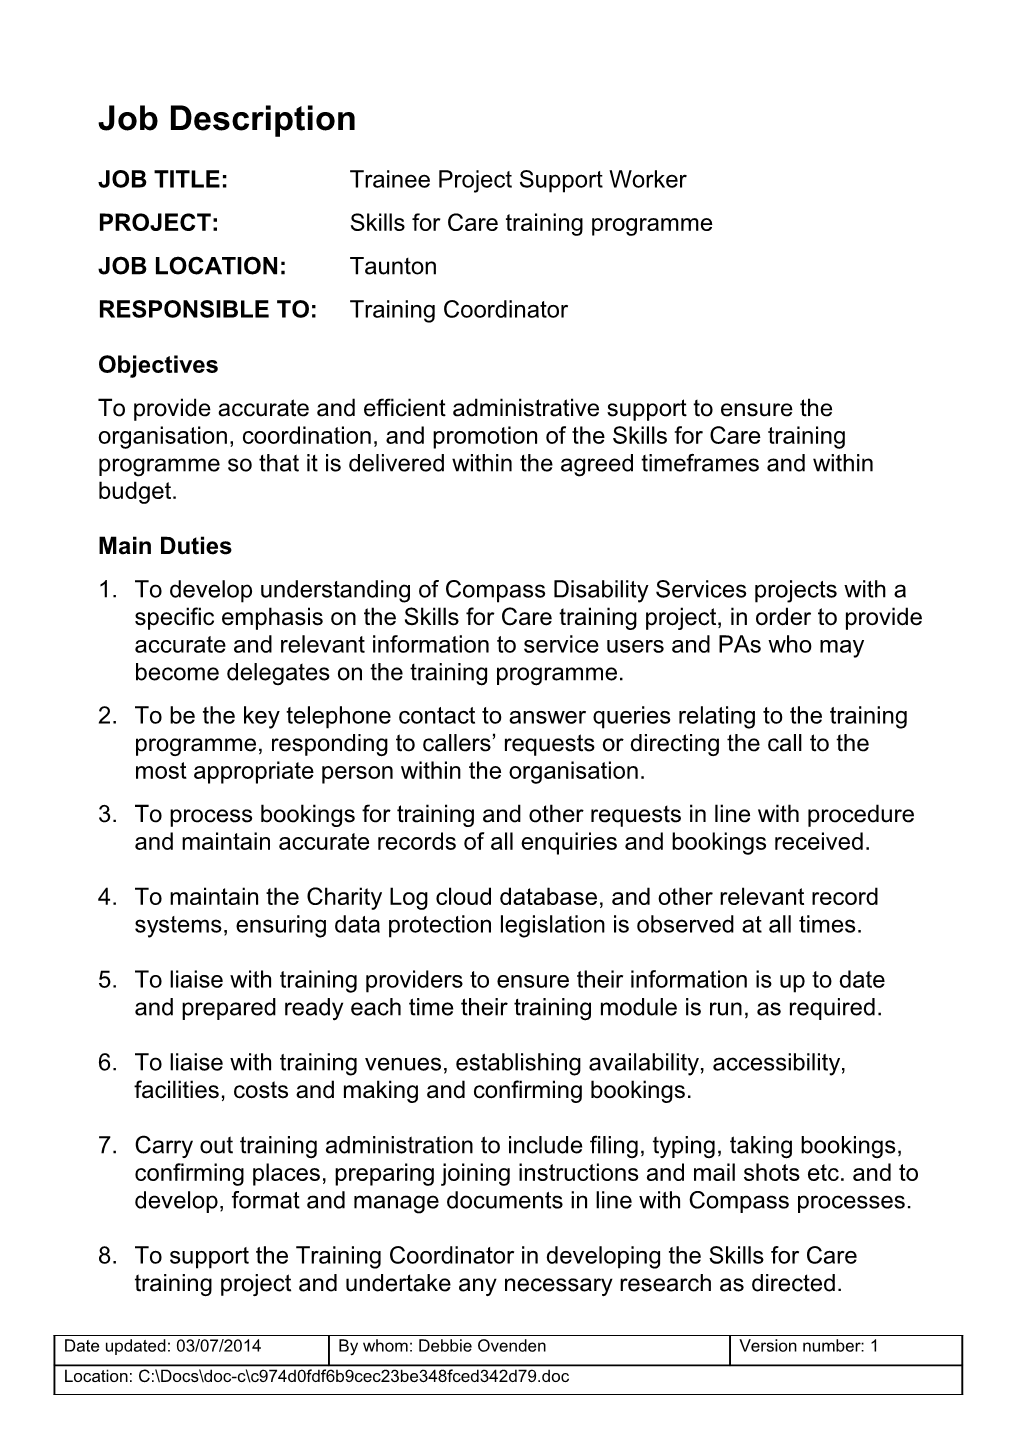 JOB TITLE:Trainee Project Support Worker